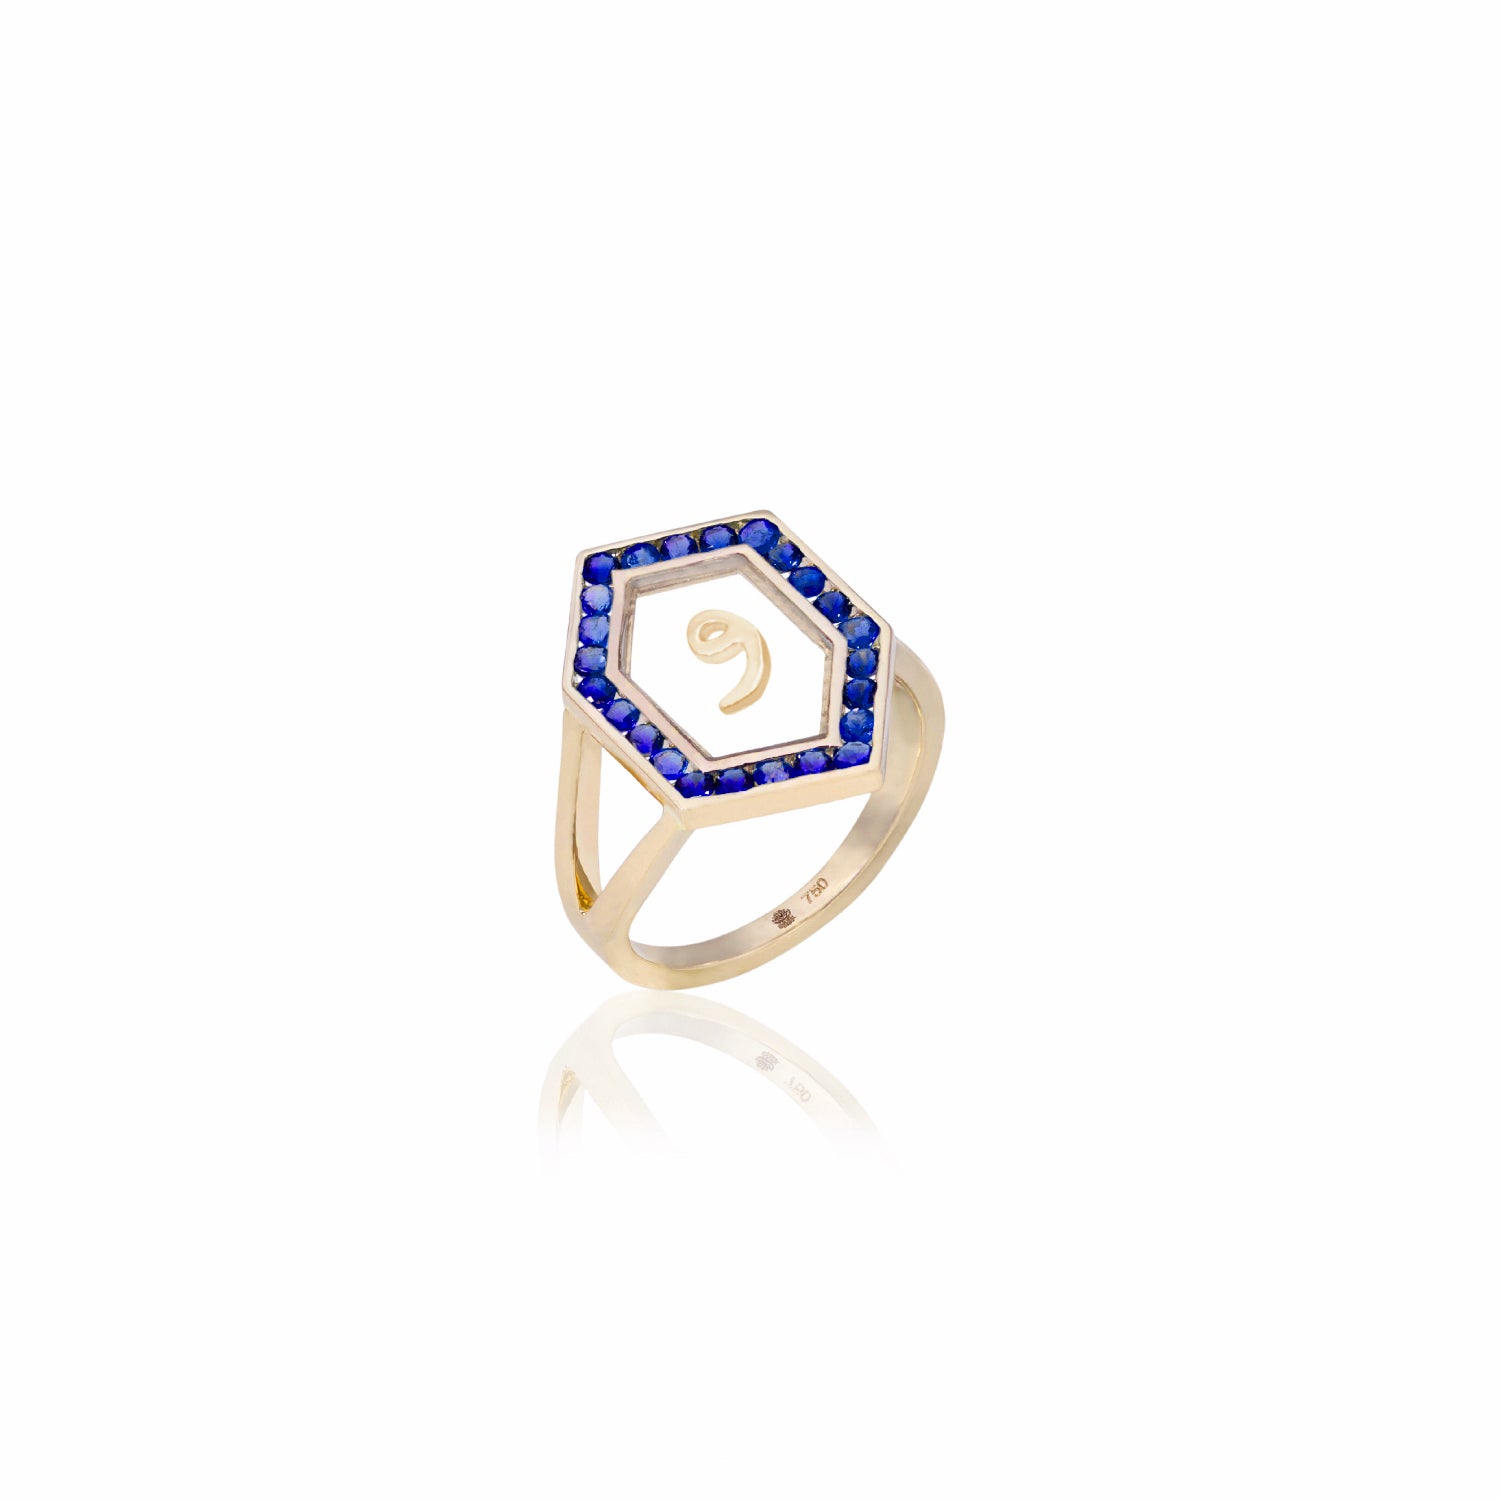 Qamoos 1.0 Letter و Sapphire Ring in Yellow Gold